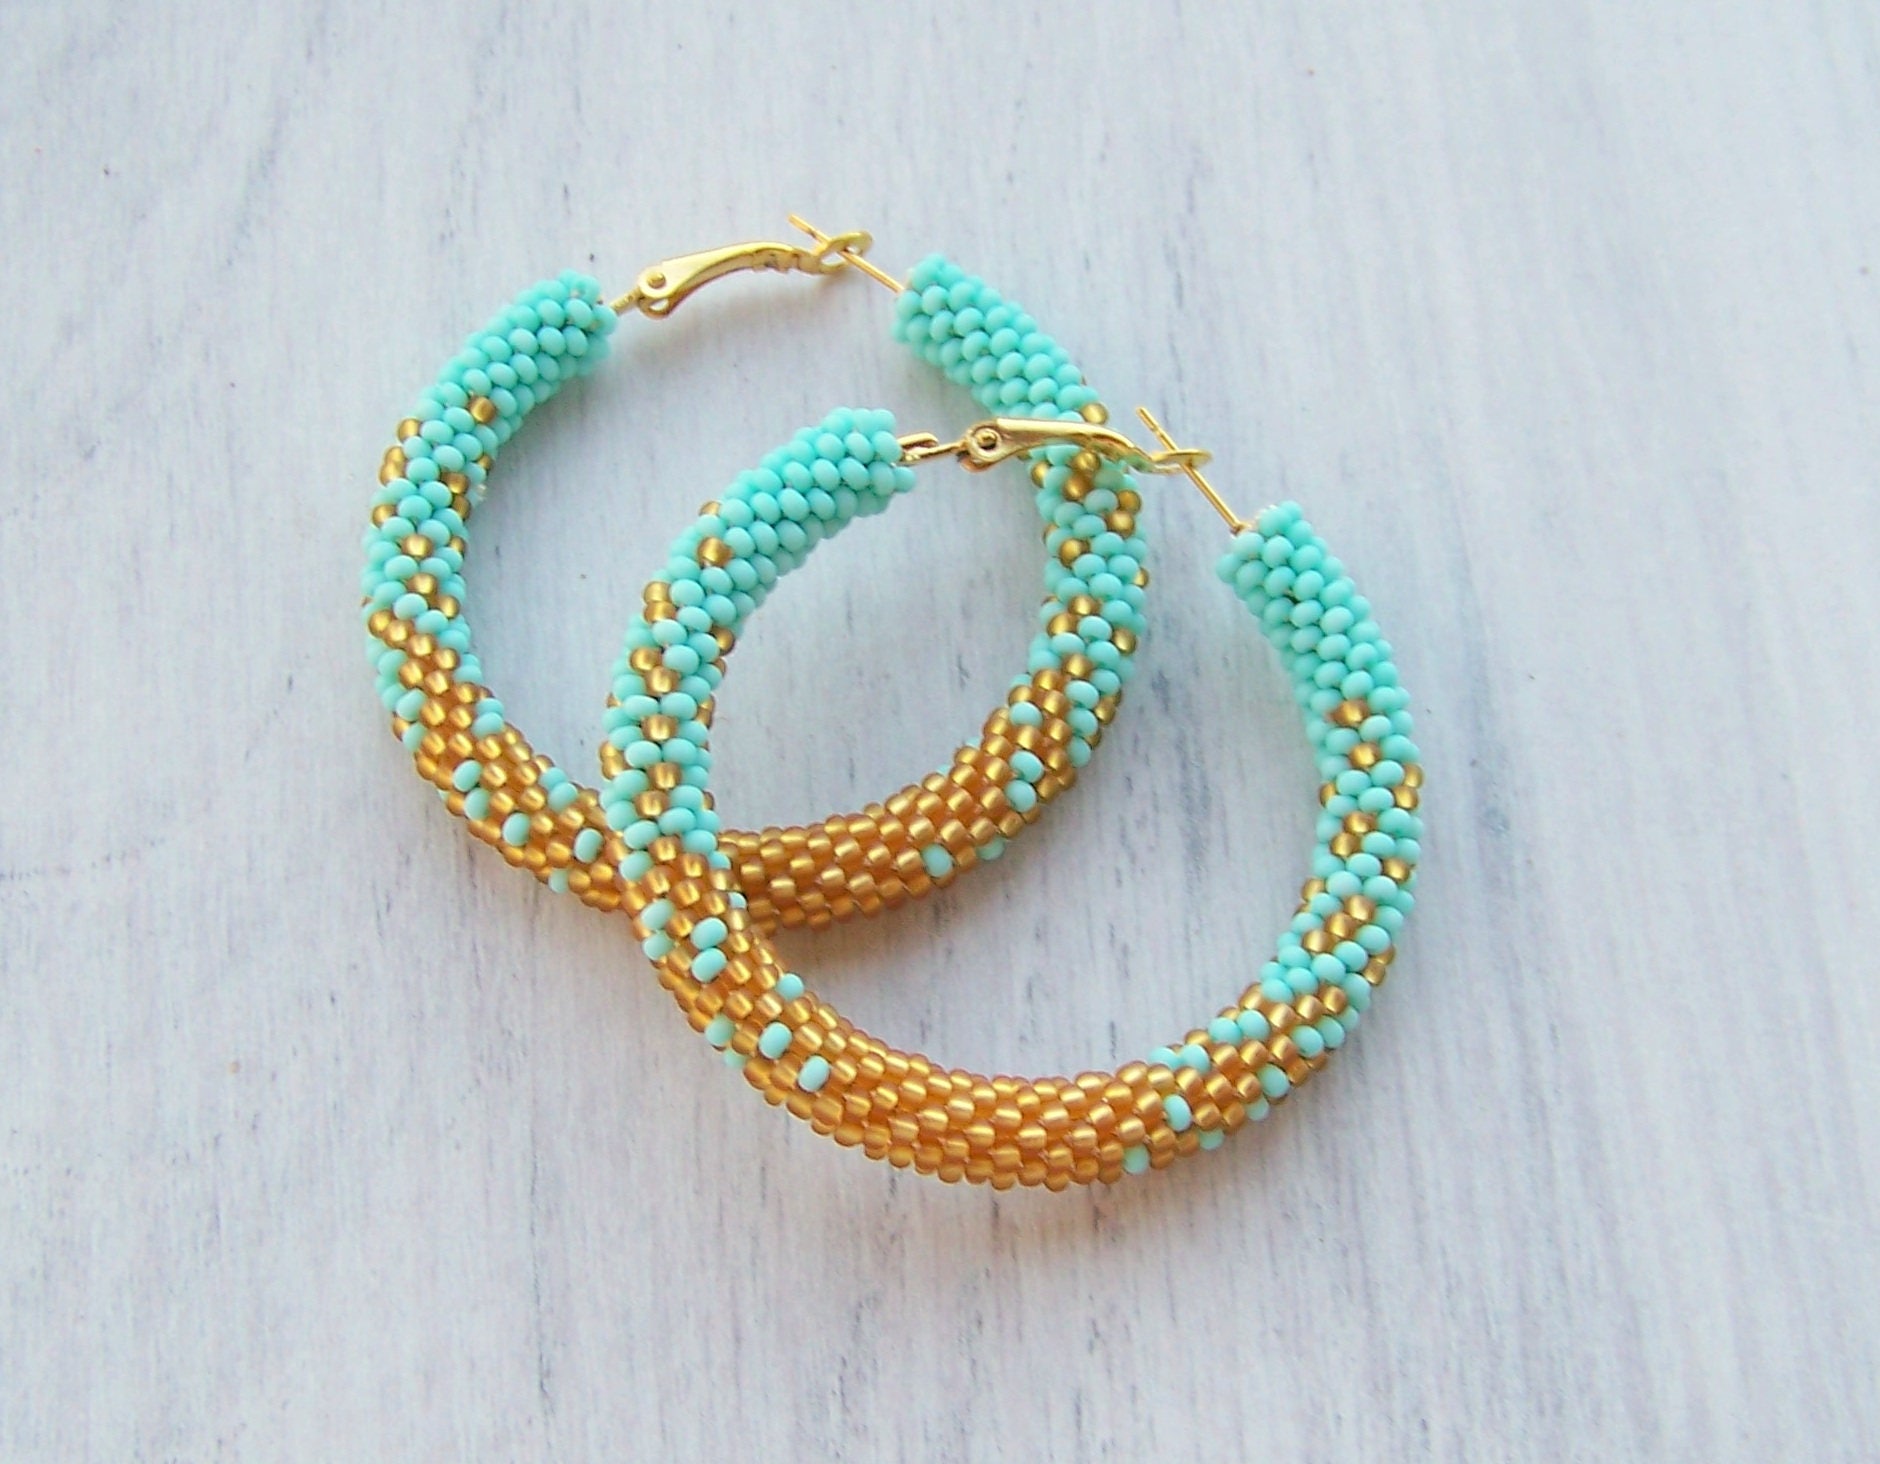 Beaded mint and gold ombre hoop earrings Beadwork beaded | Etsy